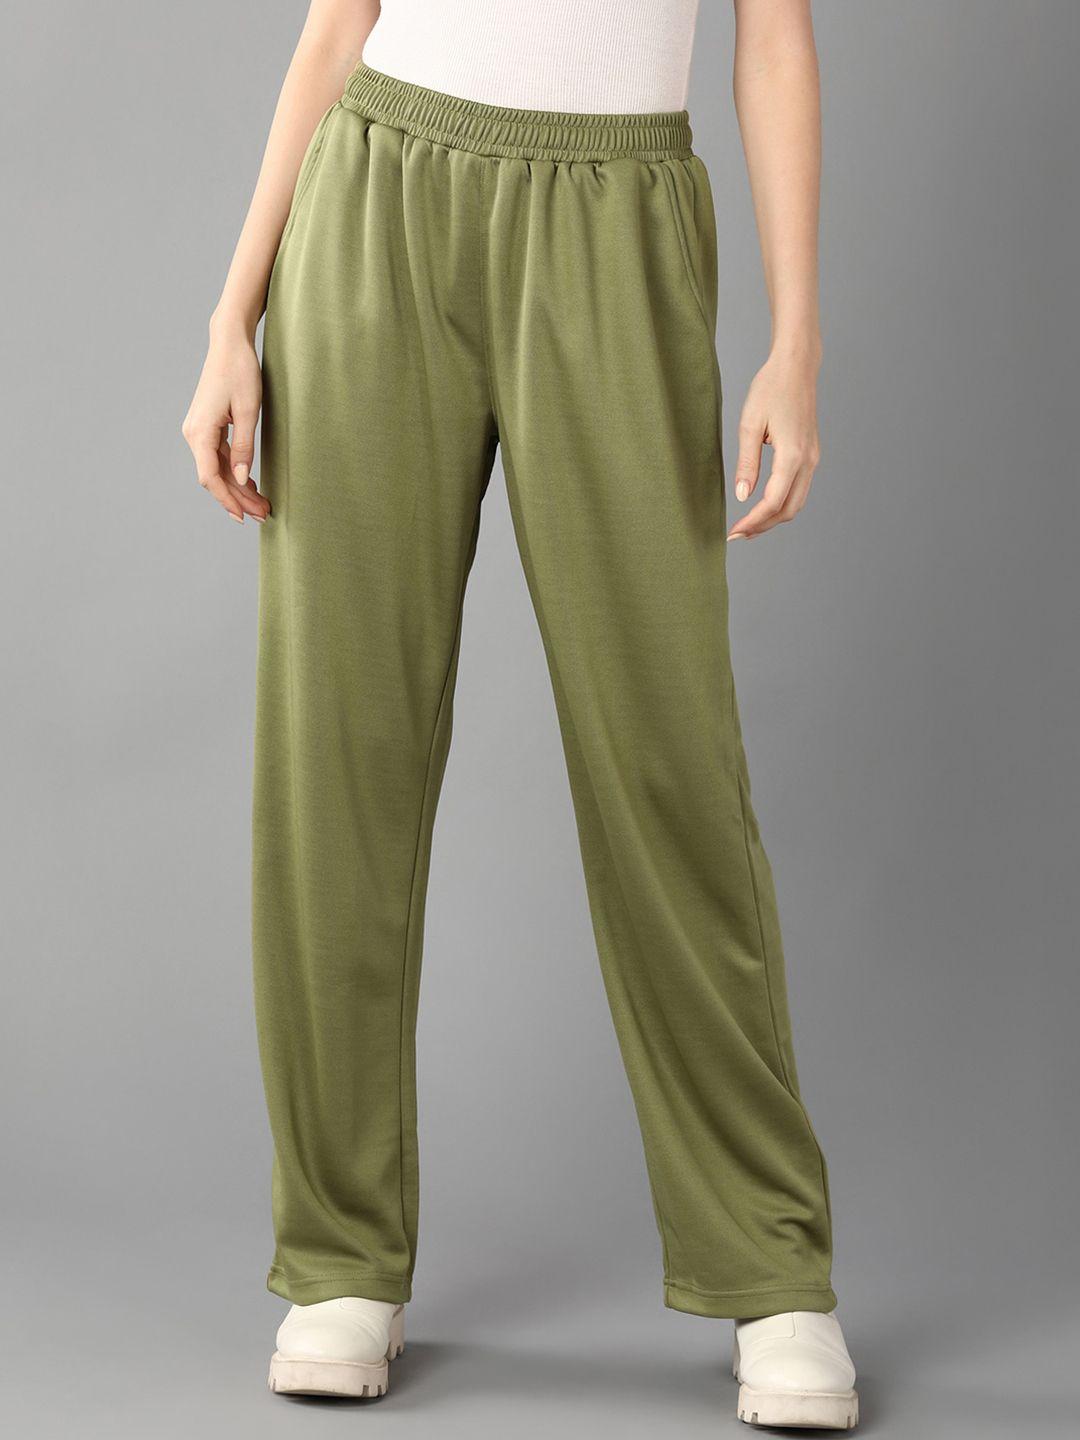 roadster-green-women-high-rise-straight-fit-track-pants